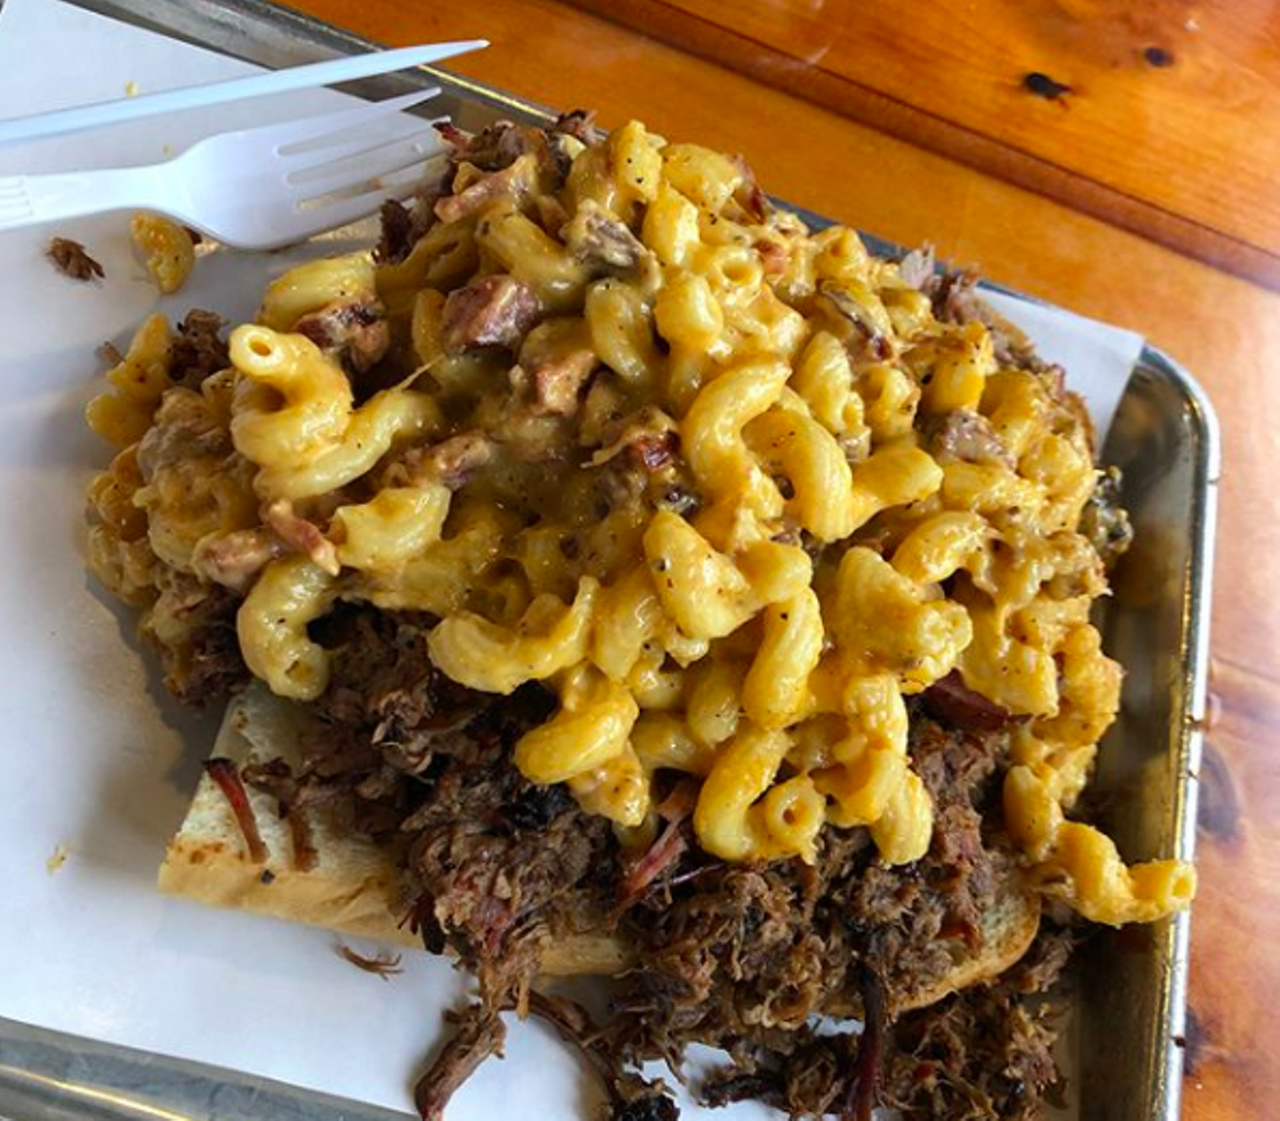 With roots as a food truck, Smoke Shack brings BBQ and Southern eats to Broadway. If you need just one reason to stop by, let it be this: the Smoke Shack Mac. Classic mac & cheese is piled high with chopped brisket and BBQ sauce. Get. It. Now.
Photo via Instagram / brad_cigarfish